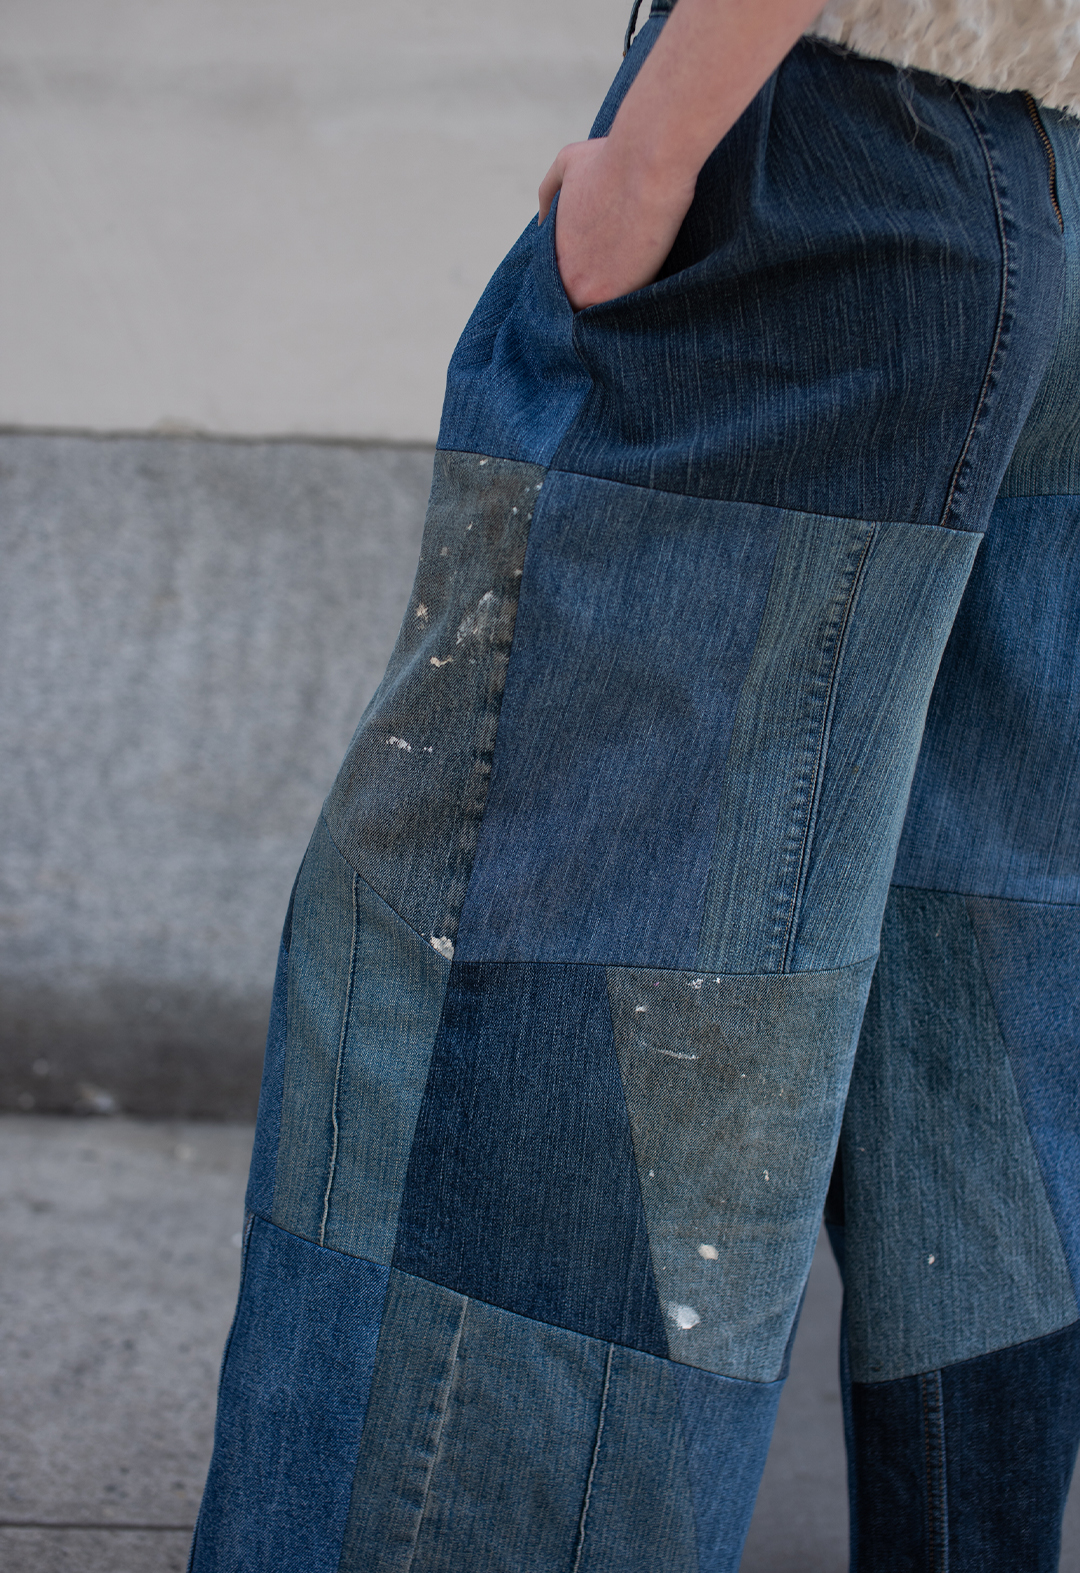 These pants are made by upcycling denim jeans and repurposing the fabric into a patchwork layout, as well as utilizing the inseam of the jean to create a design detail that enhances the assortment of denim-blue washes. The photo is of a girl's bottom torso with her hands inside the inseam pocket, one of her legs extends slightly outward, revealing the patchwork design. The background has multicolored gray and beige concrete panels.  